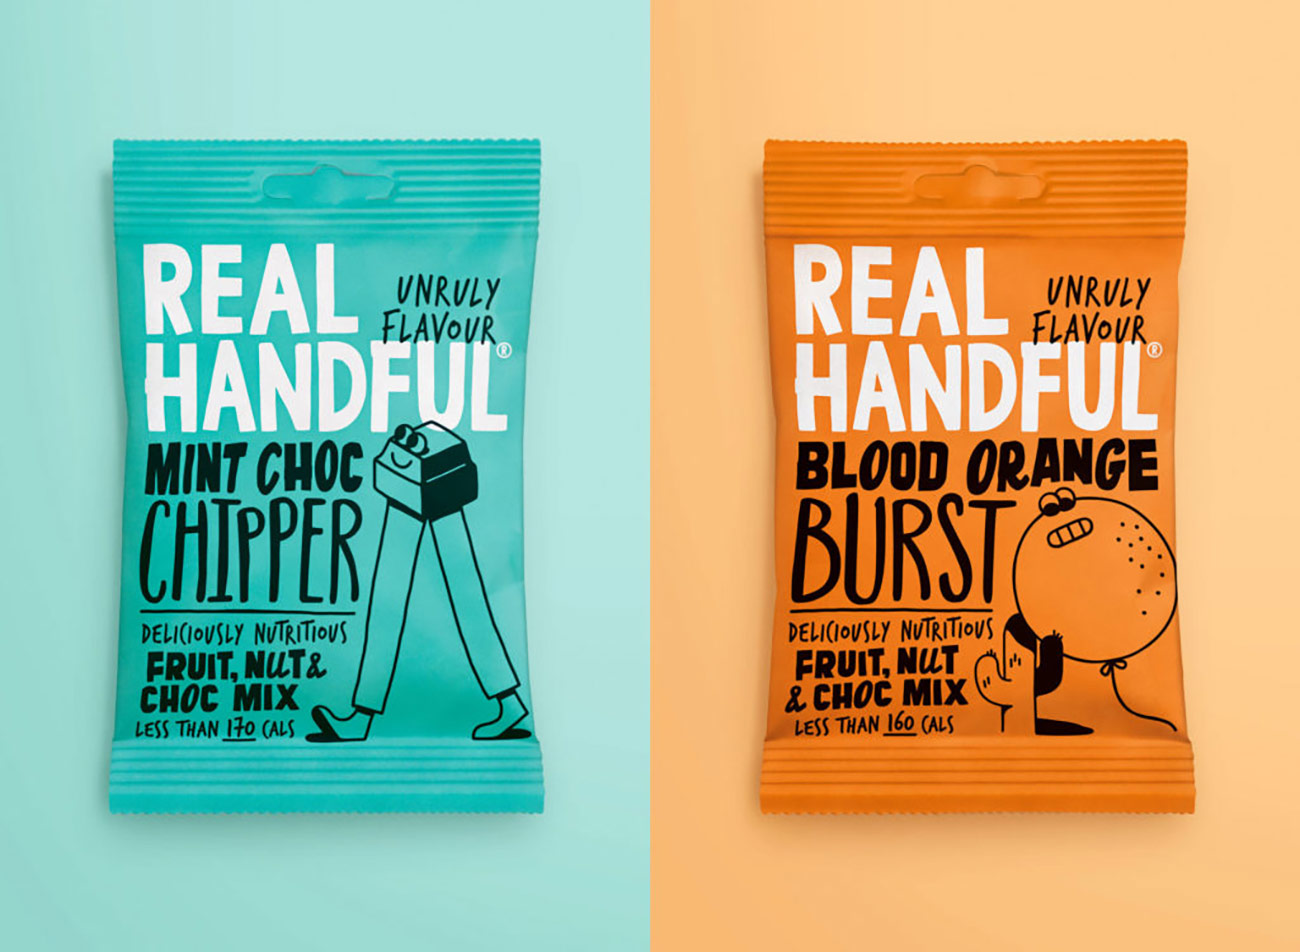 Real Handful Brand Re-Launch